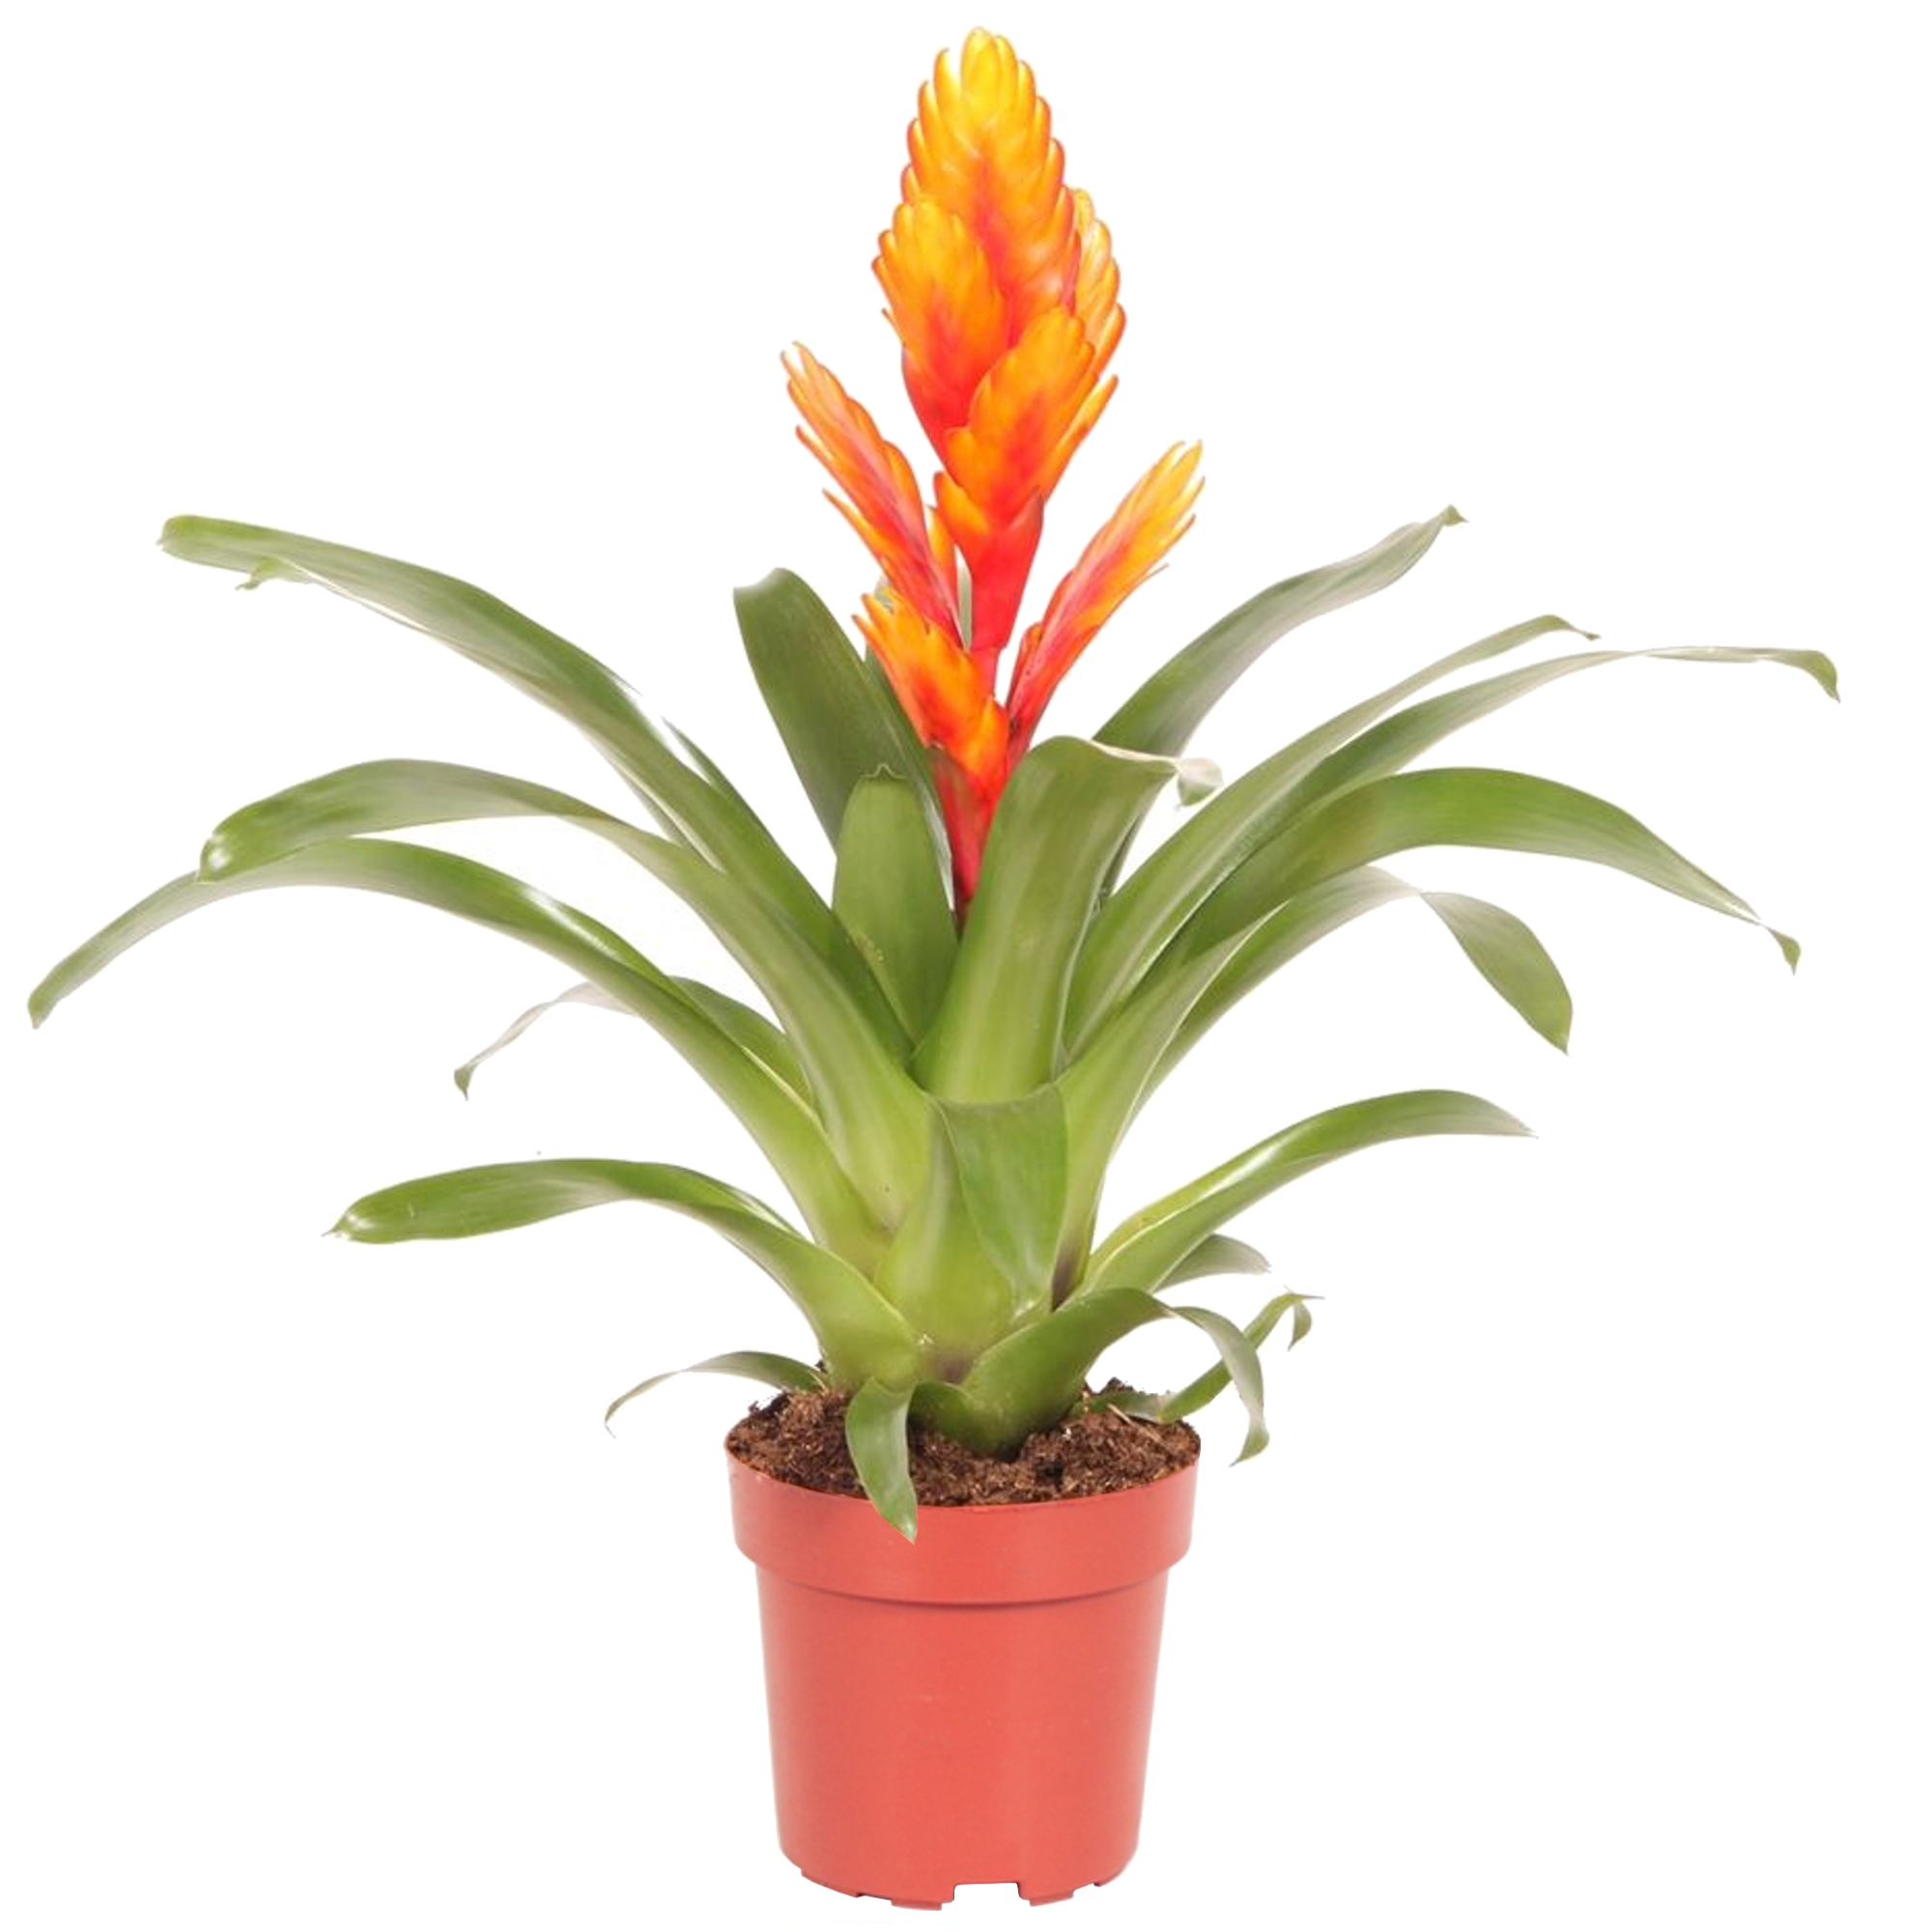 Flammendes Schwert 'Intenso' orange 12 cm Topf + product picture